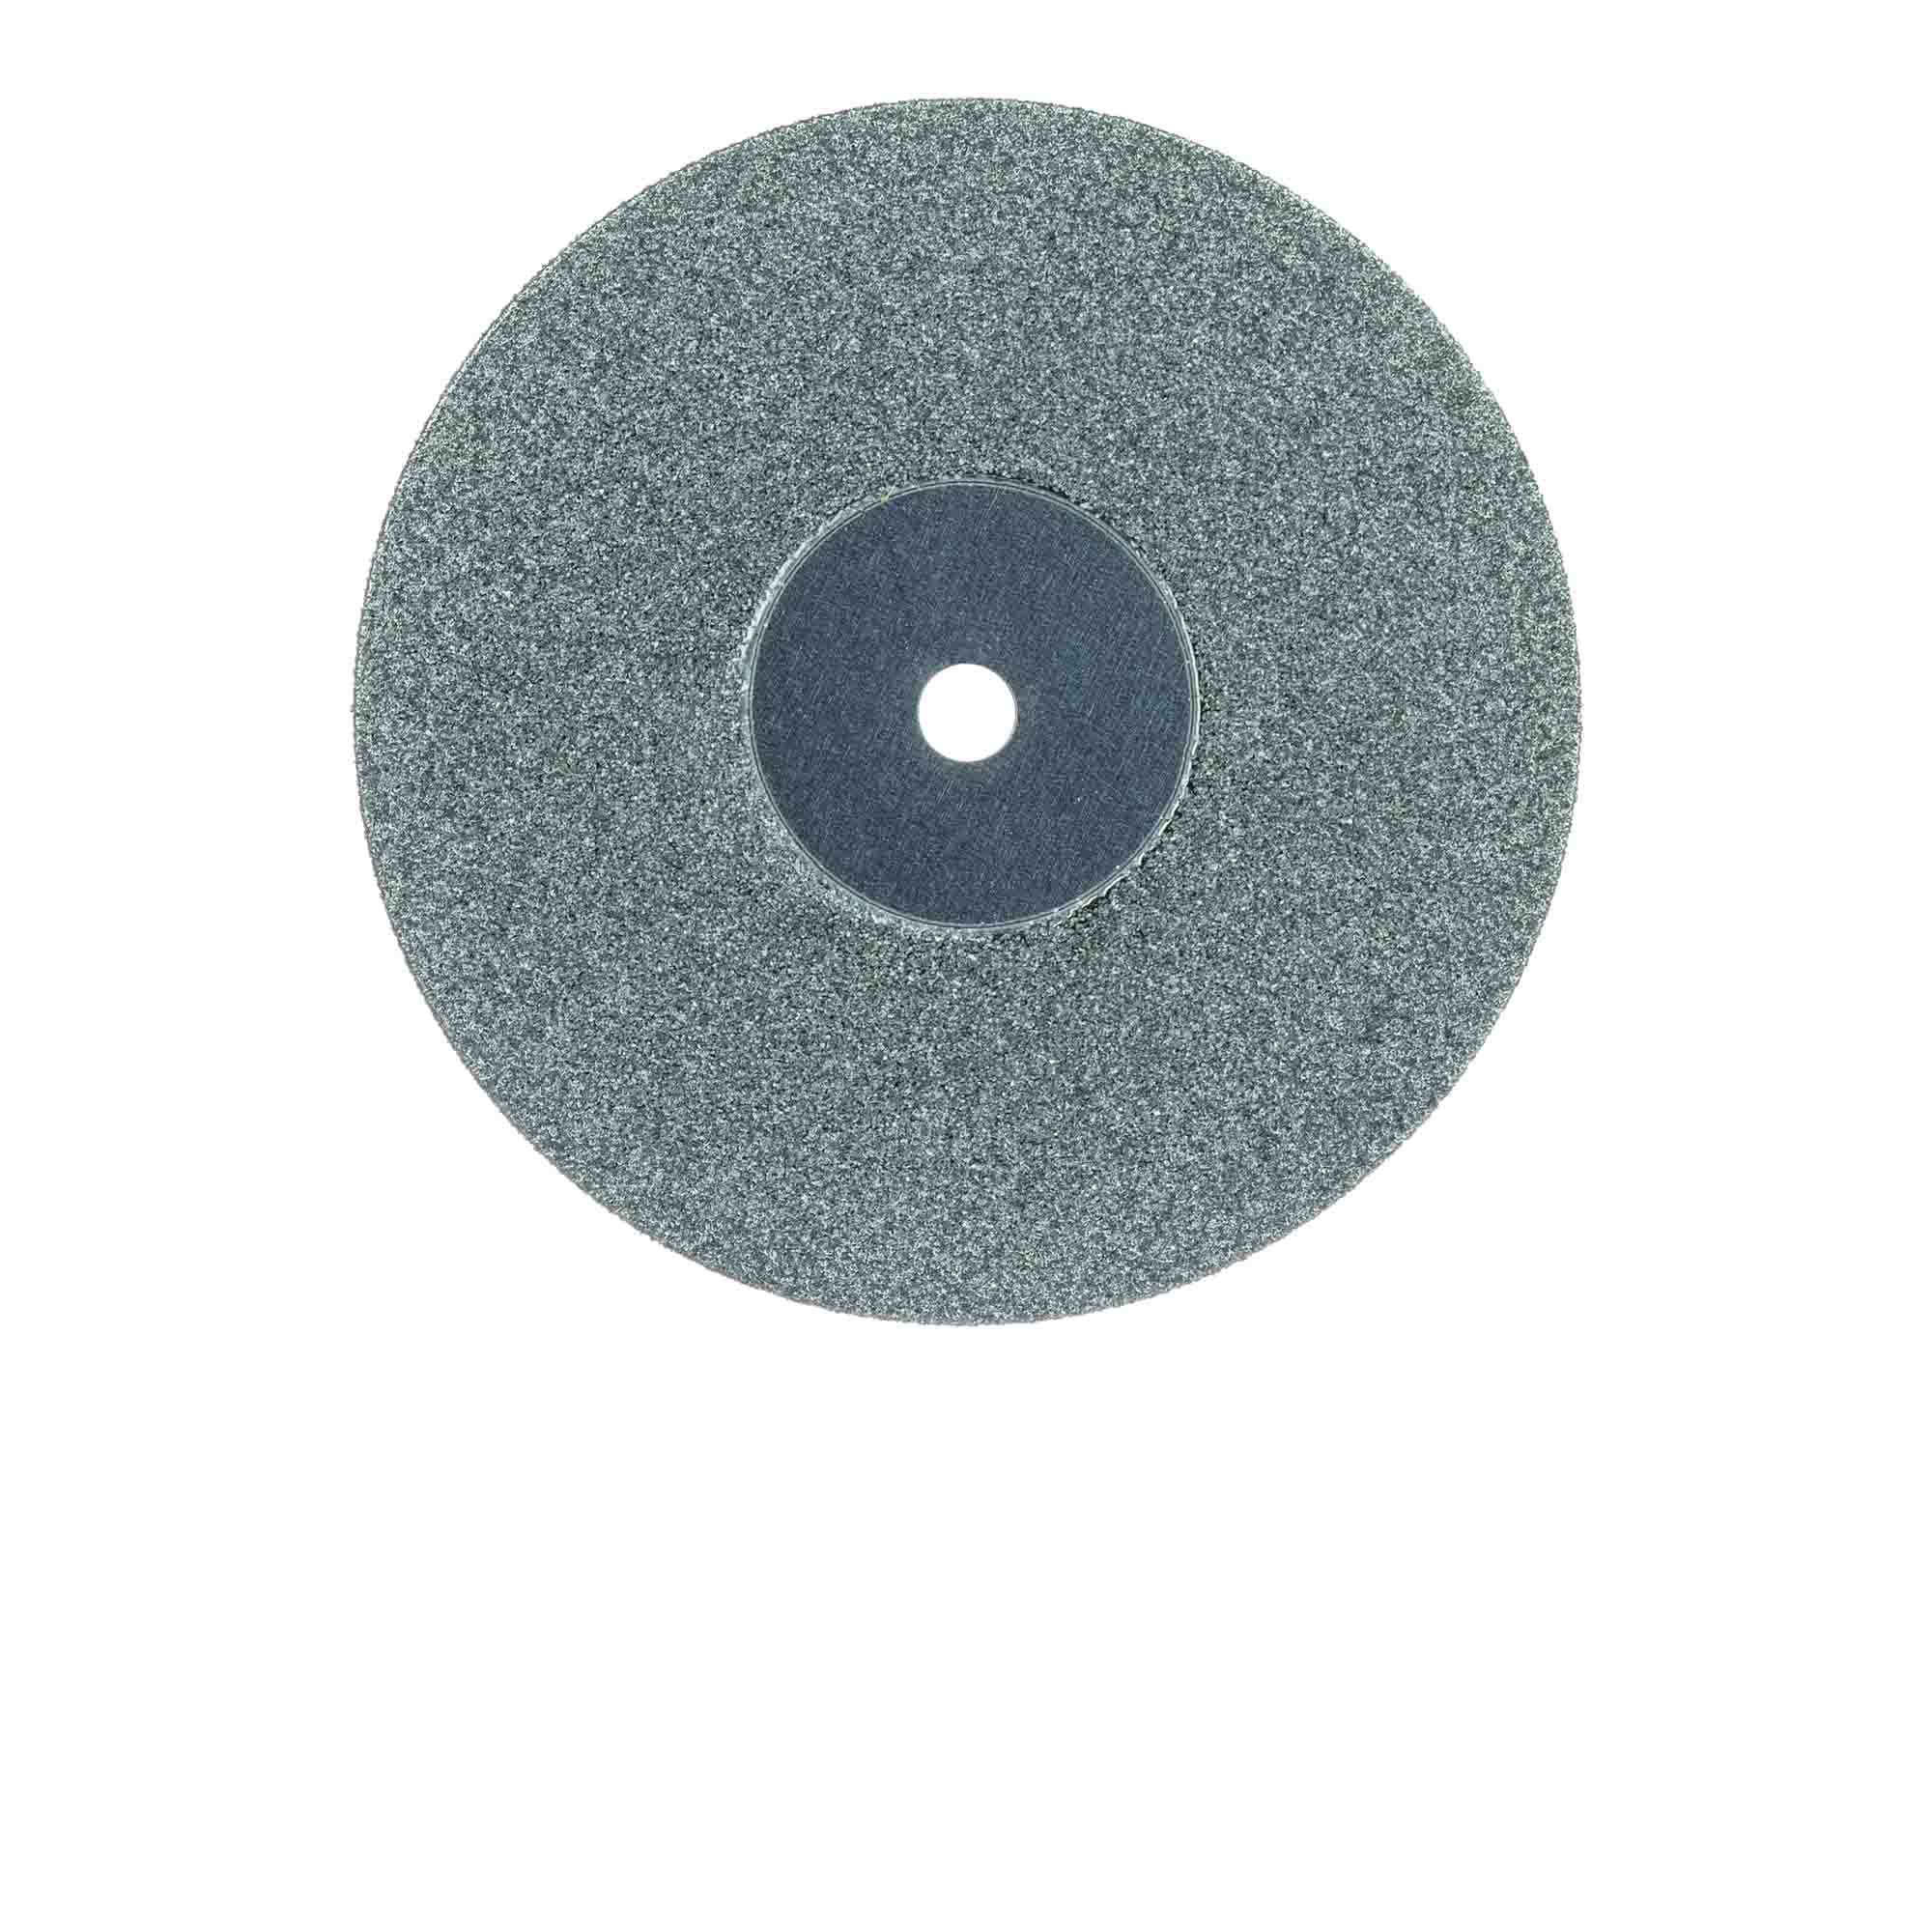 916D-220-UNM Diamond Disc, Double Sided, 0.5mm Thick, 22mm Ø, UNM